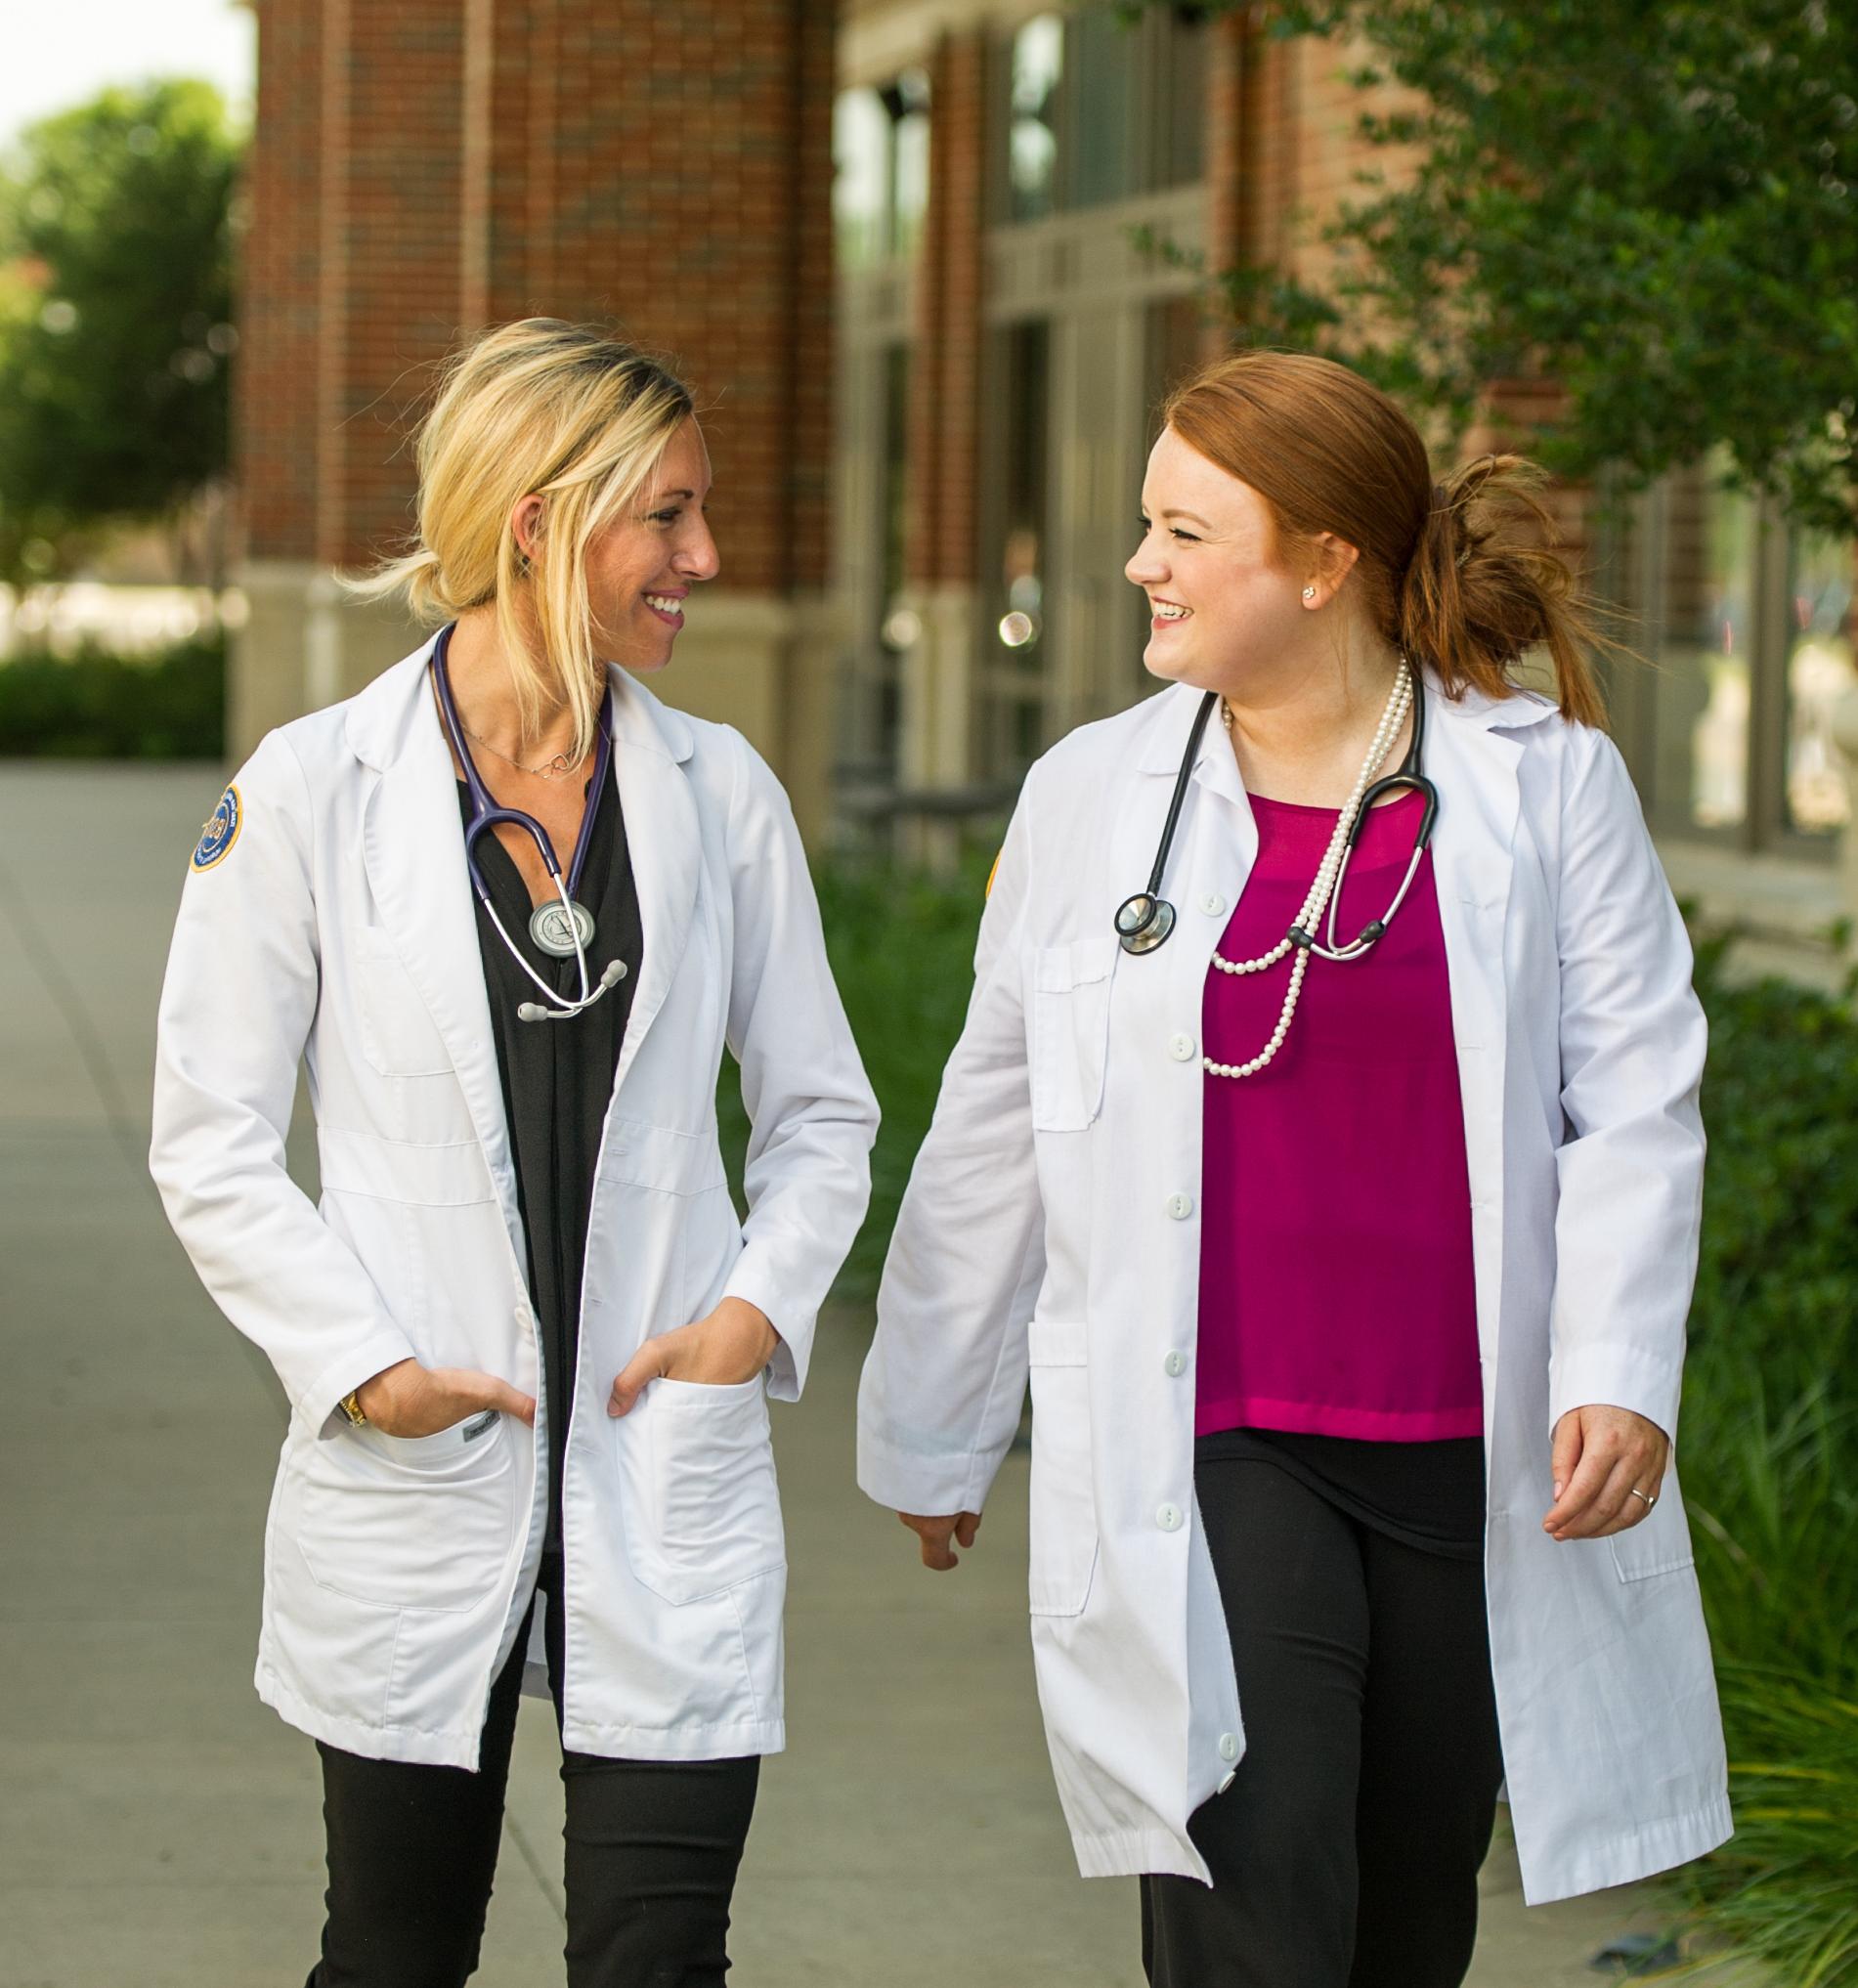 Two nursing student talking to one another.